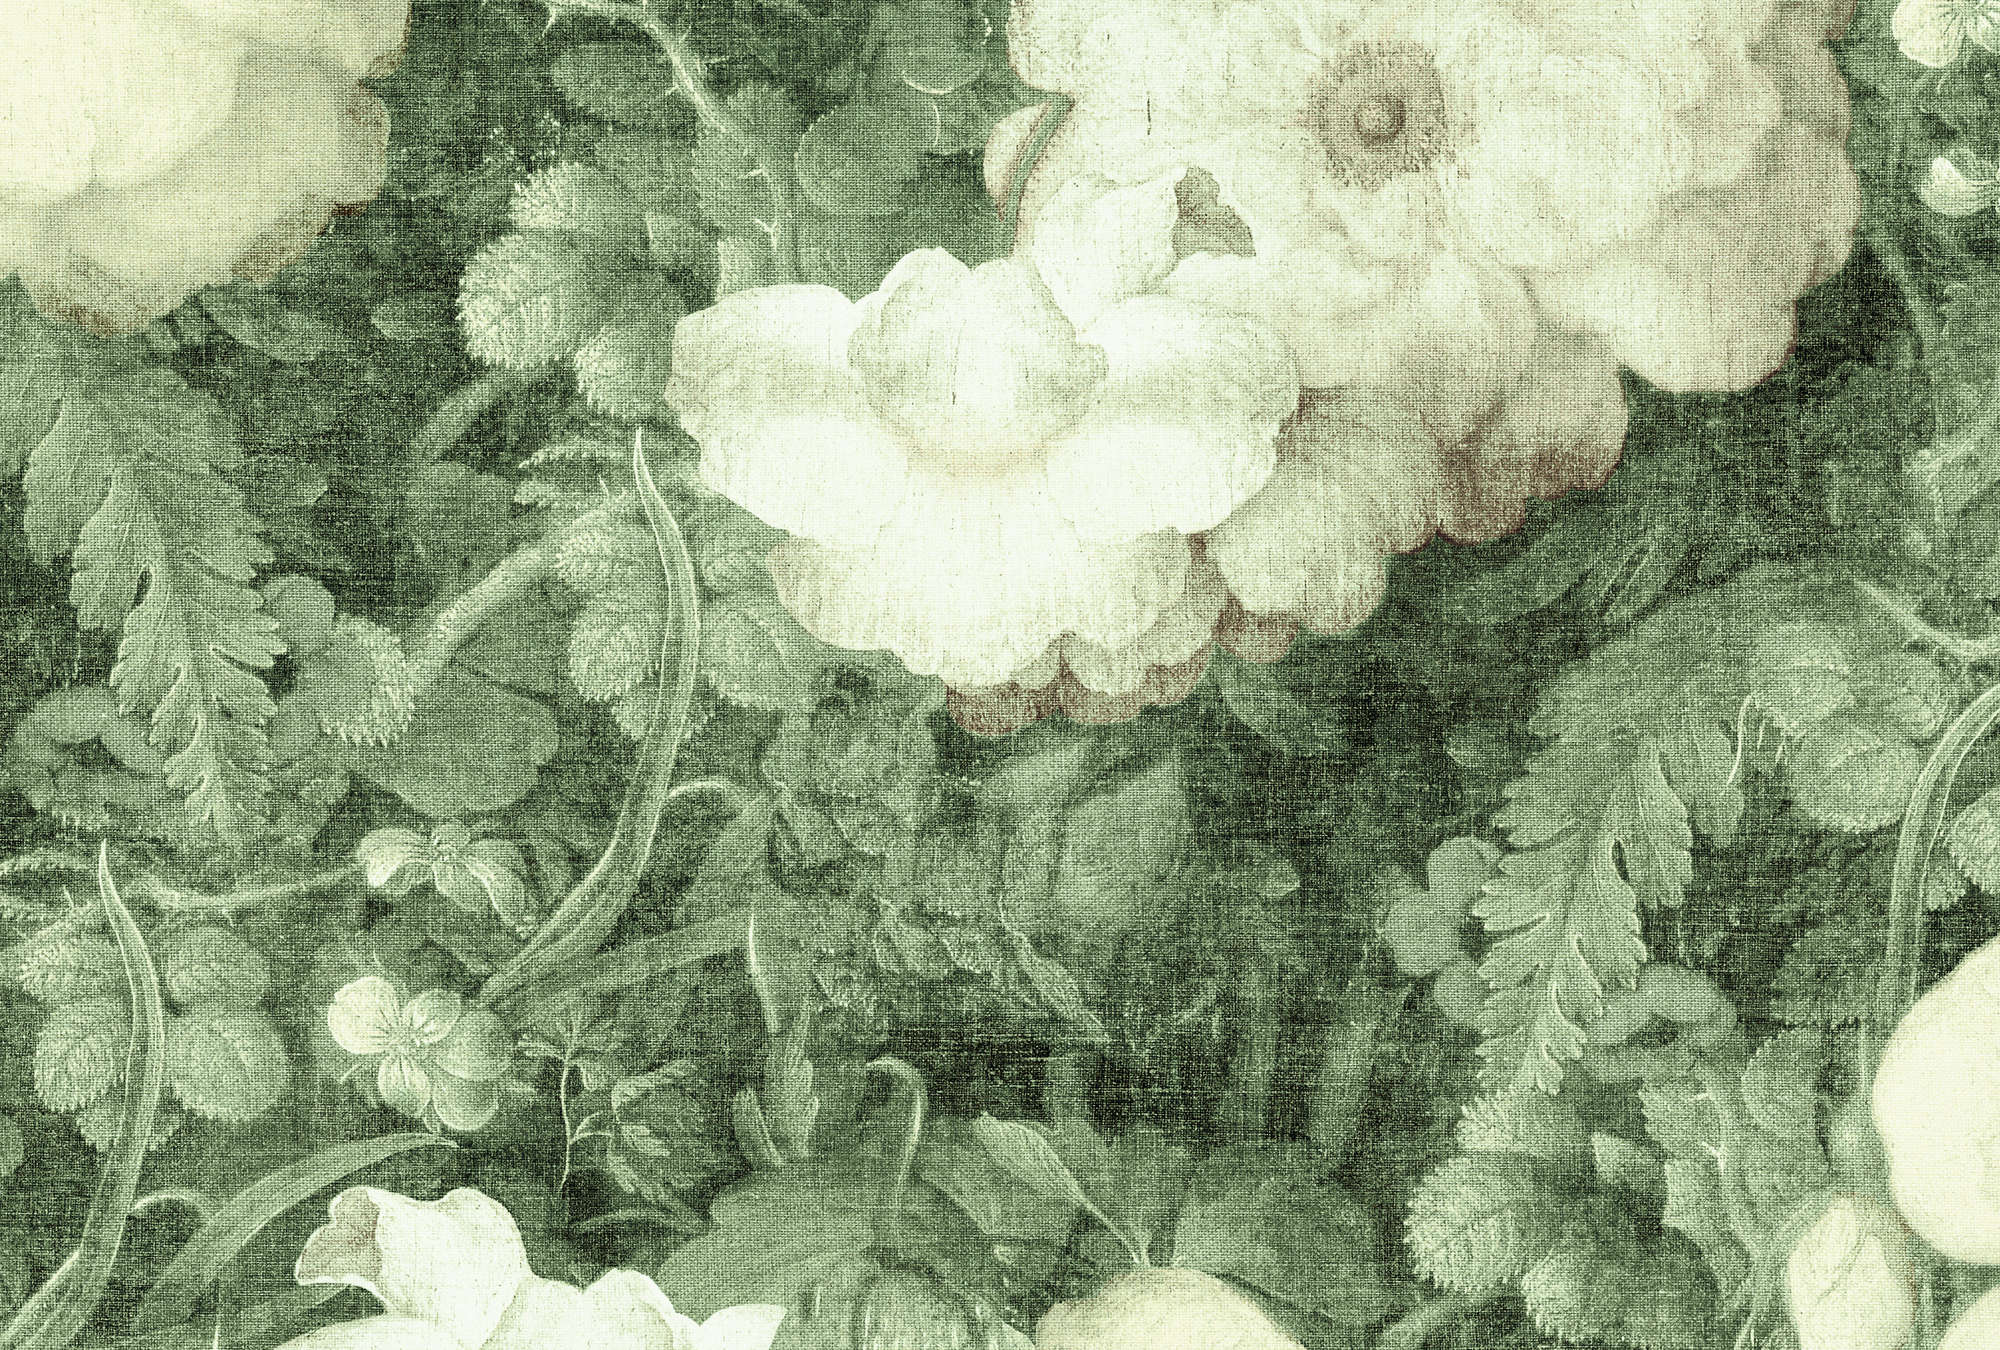             Flowers mural painting & natural linen look - Green, White
        